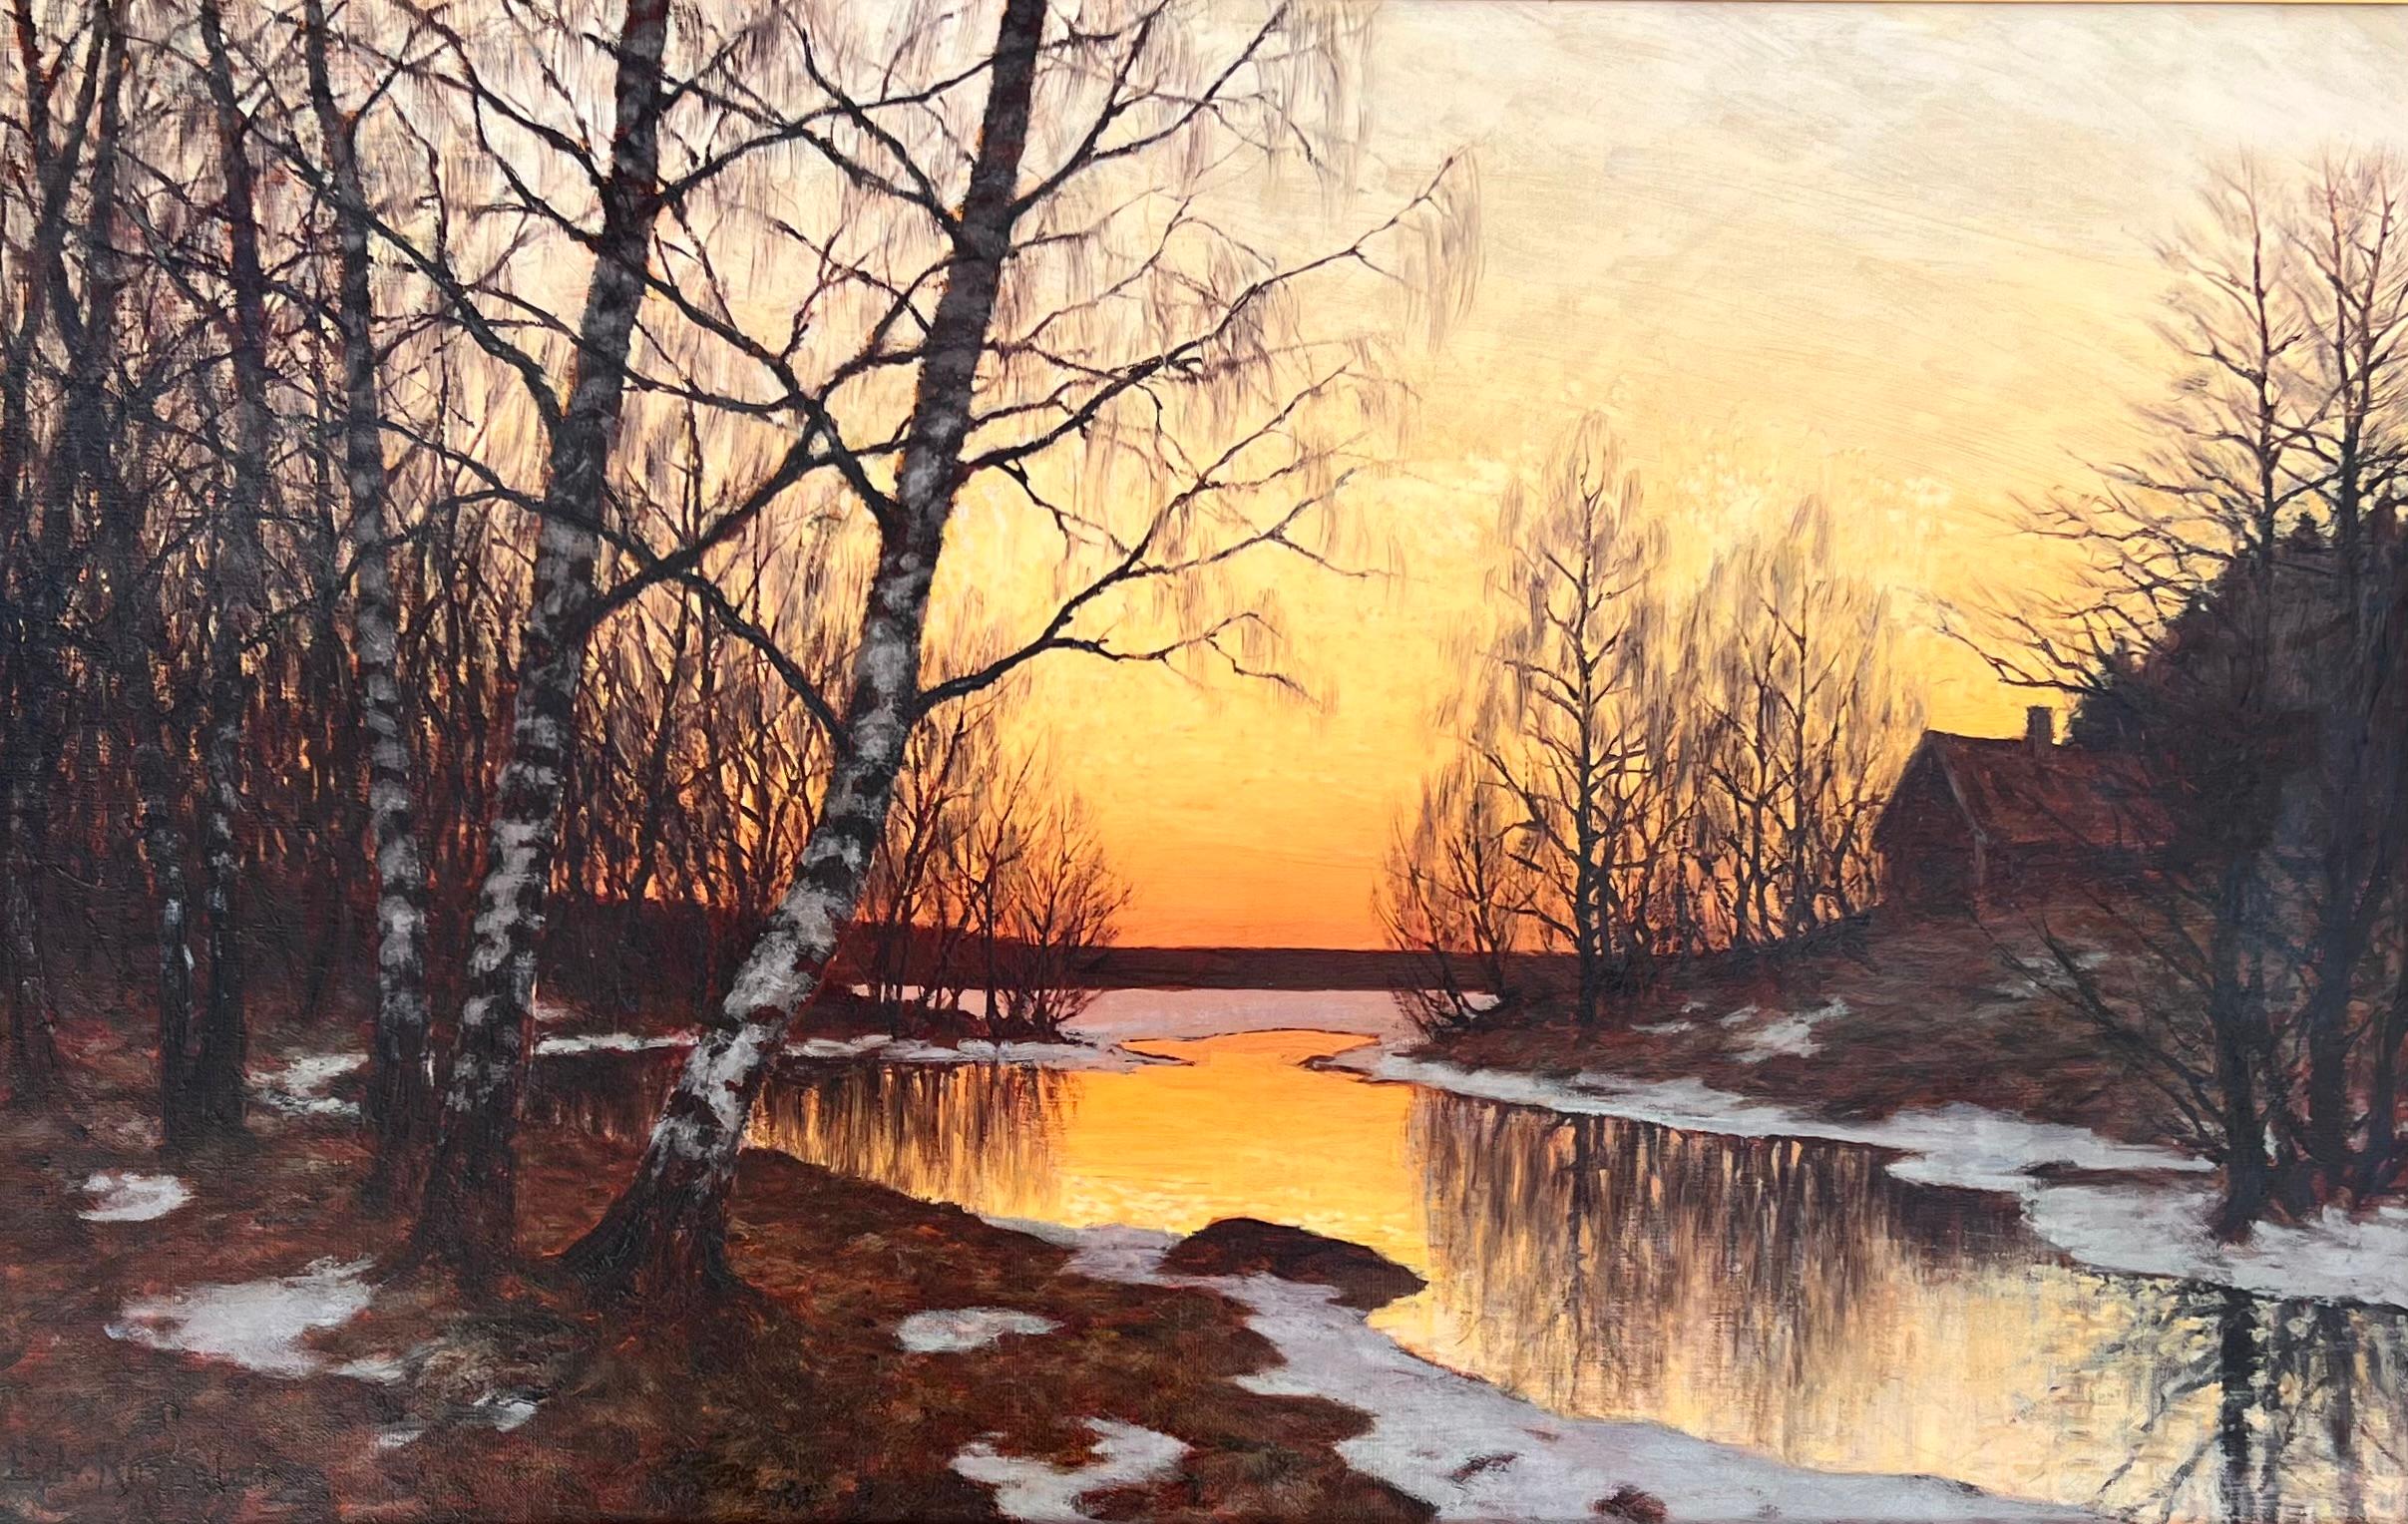 Oil on canvas, signed lower left.
A luminous sunset or sunrise winter scene from Scandinavia. 
Edvard Axel Rosenberg (Swedish School, 1858-1934) In many ways Edward Rosenberg was the archetypal Swedish painter, he was born in Stockholm in 1858 and